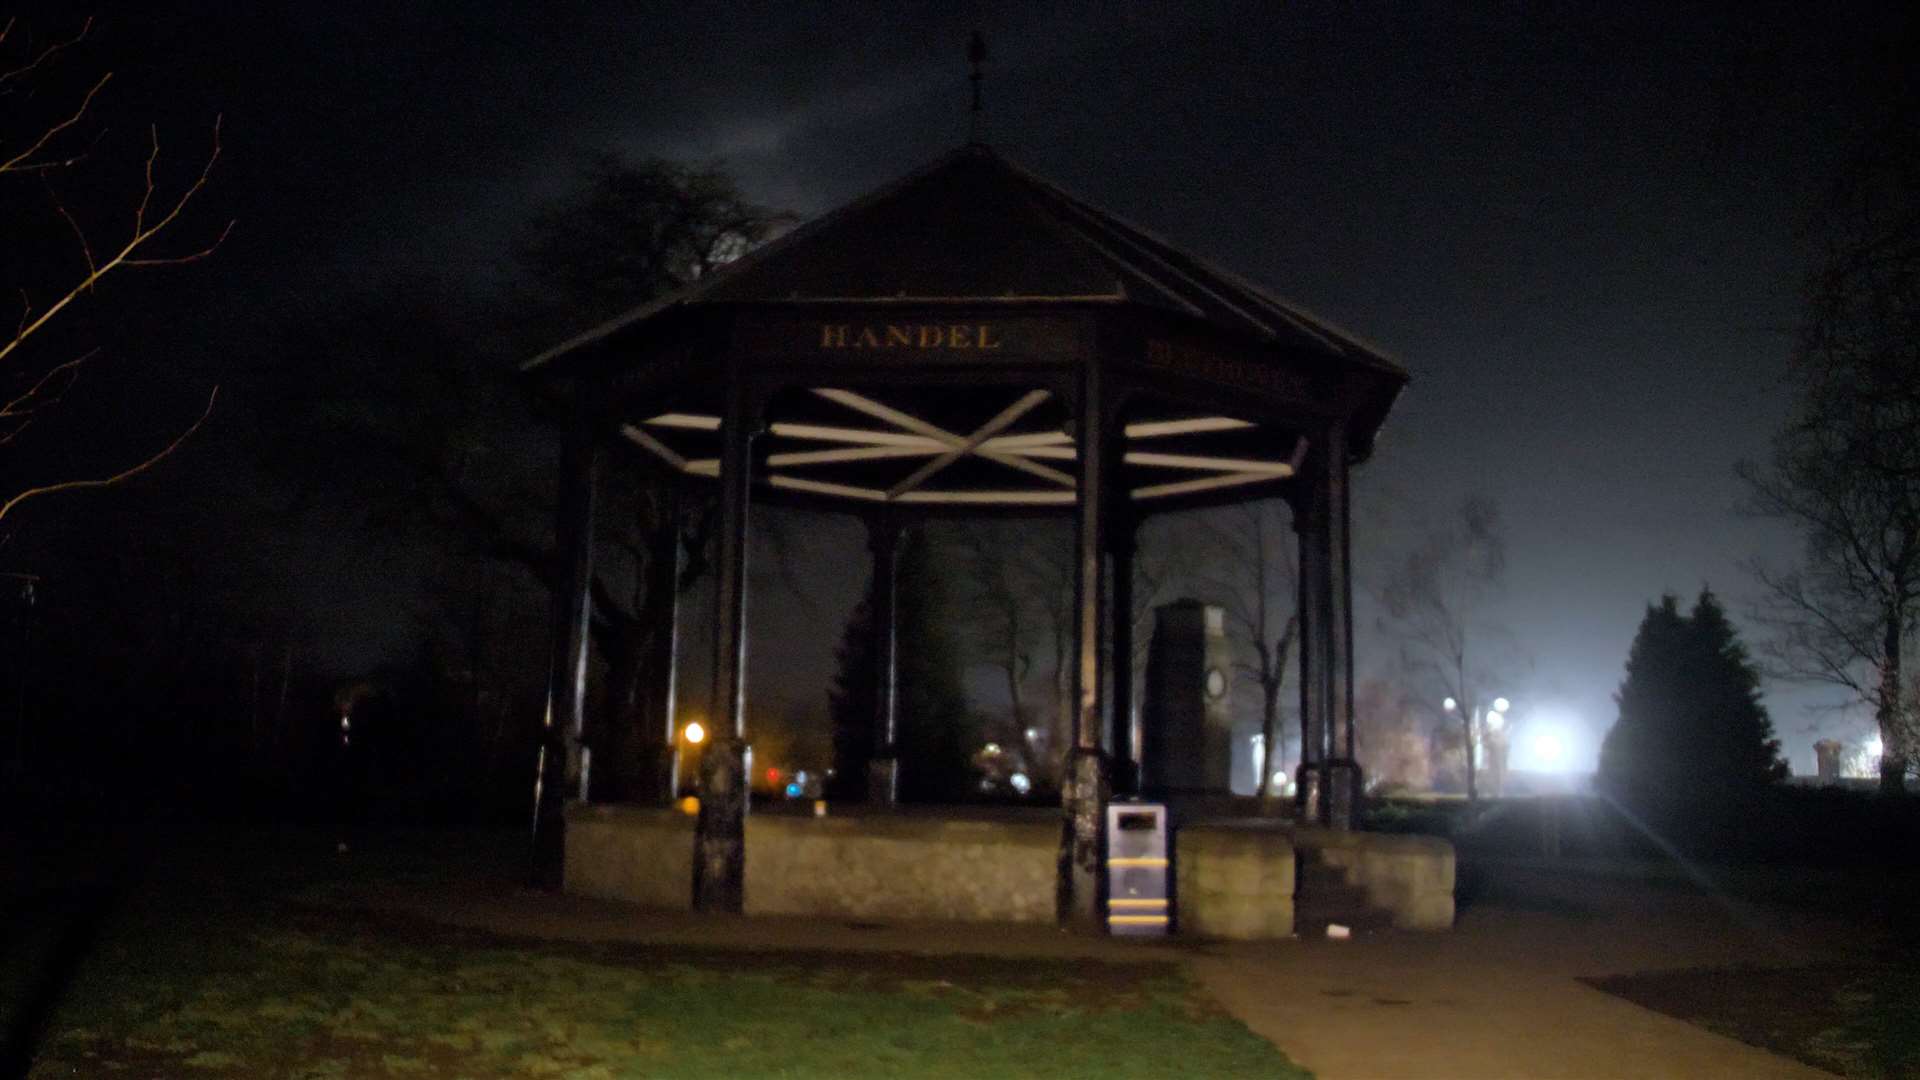 Brenchley Gardens, Maidstone, at night